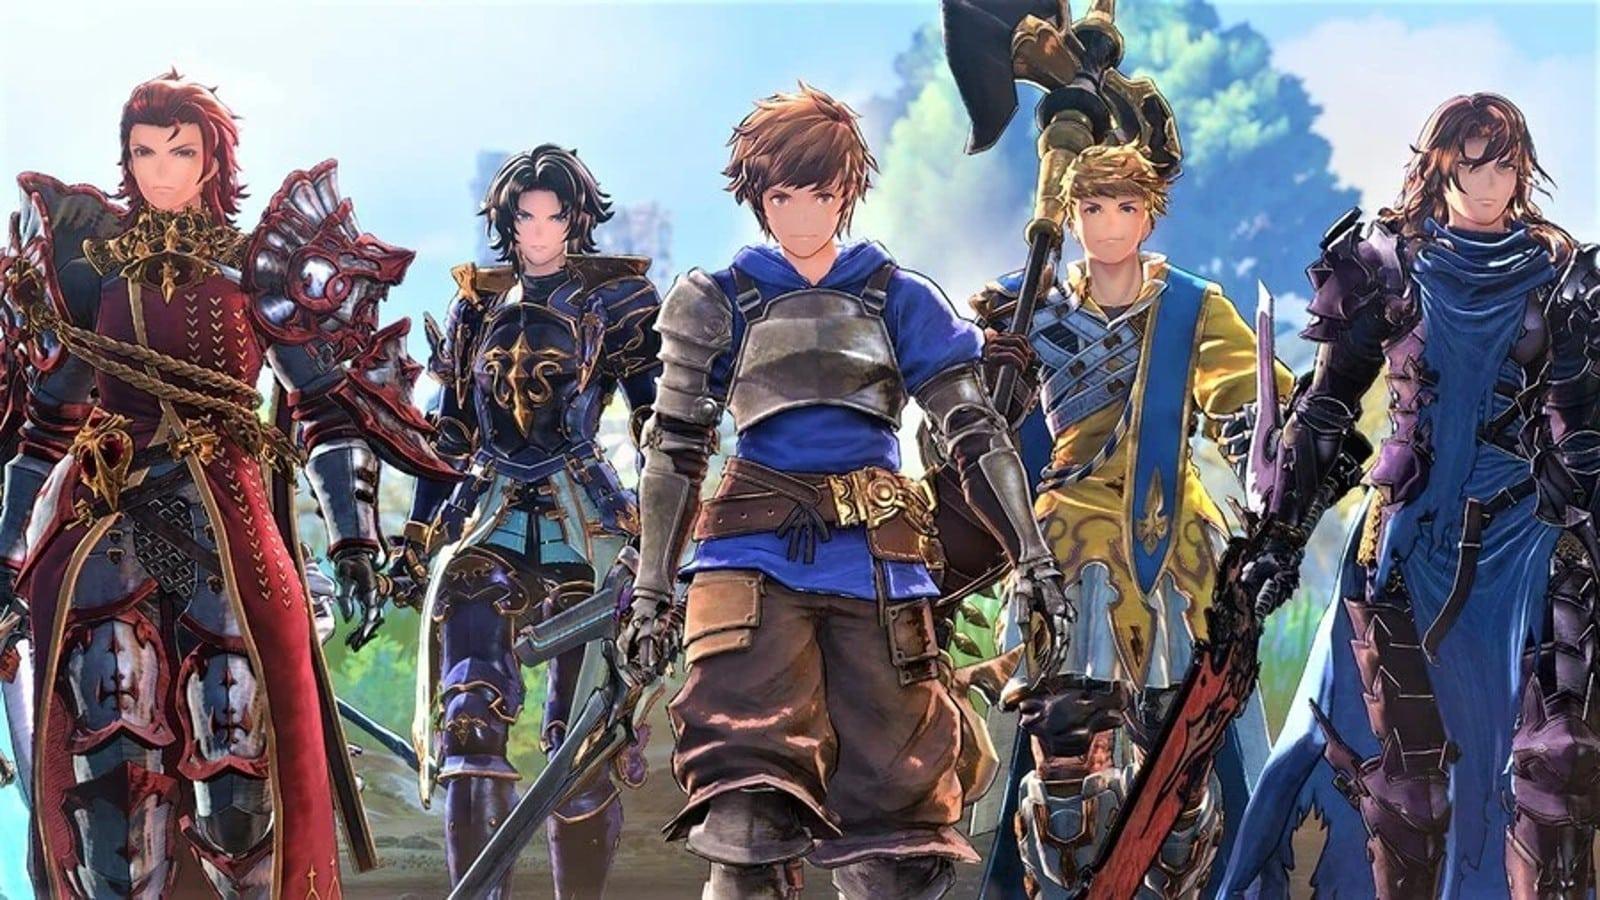 An image of the core party members in Granblue Fantasy: Relink.